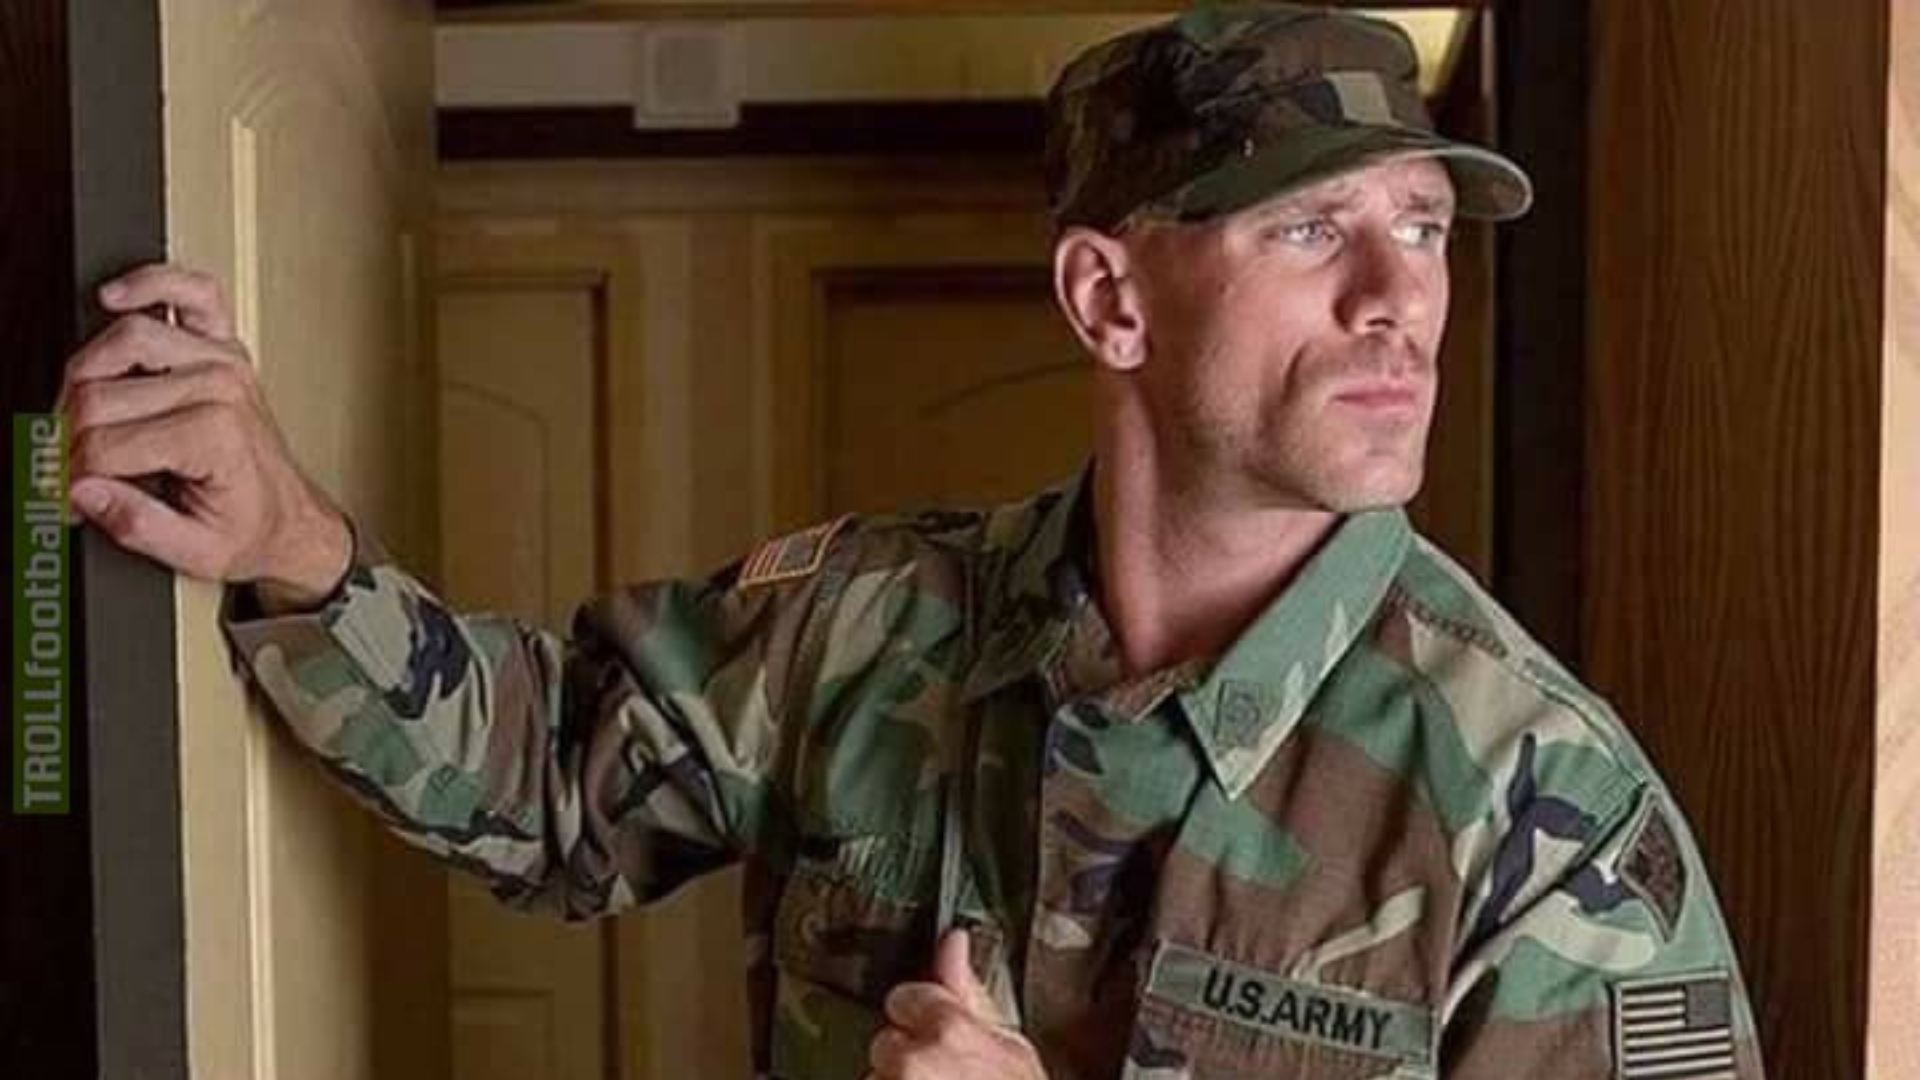 Johnny Sins wearing an army uniform while standing at the door